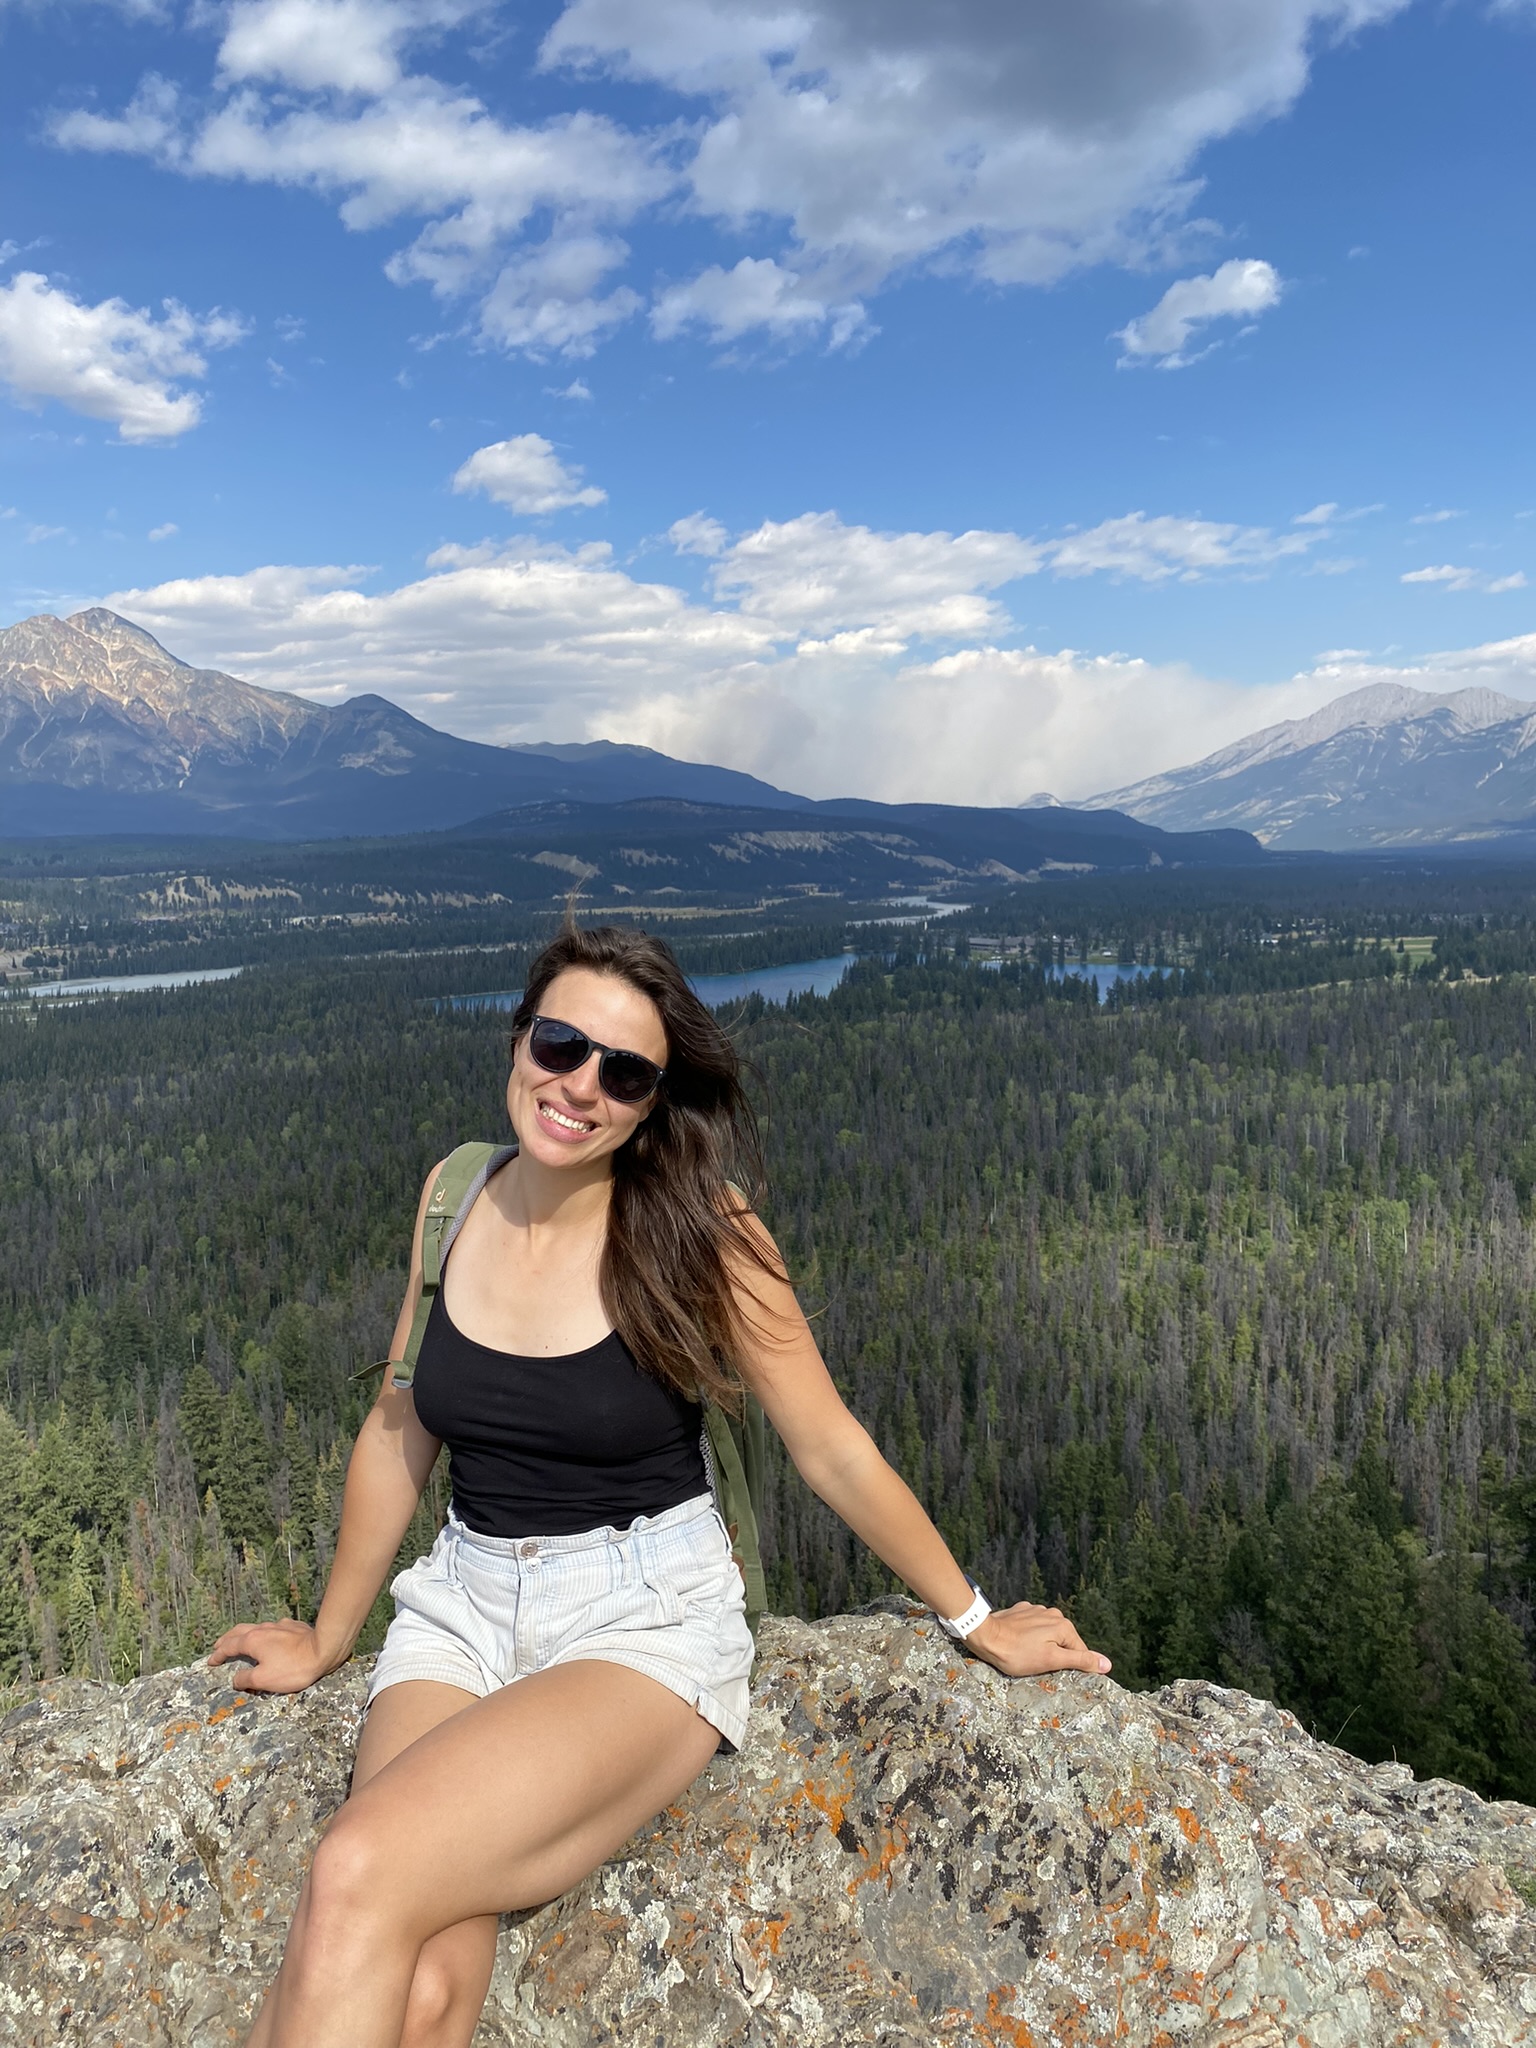 life and business coach ana mcrae in rocky mountains